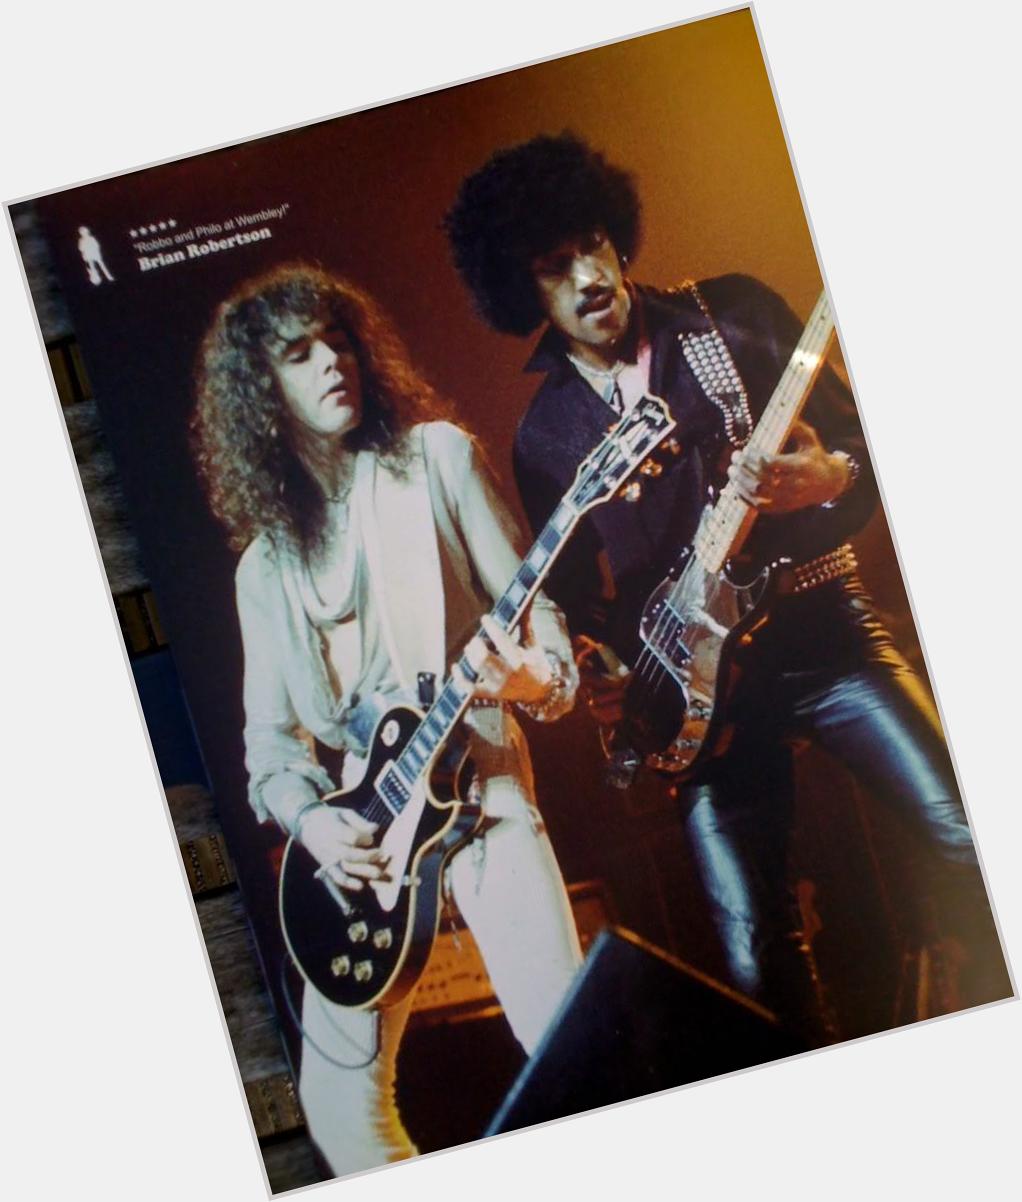 Wishing a happy birthday to the late legendary Phil Lynott, who helped carve rock and metal into what it is today. 